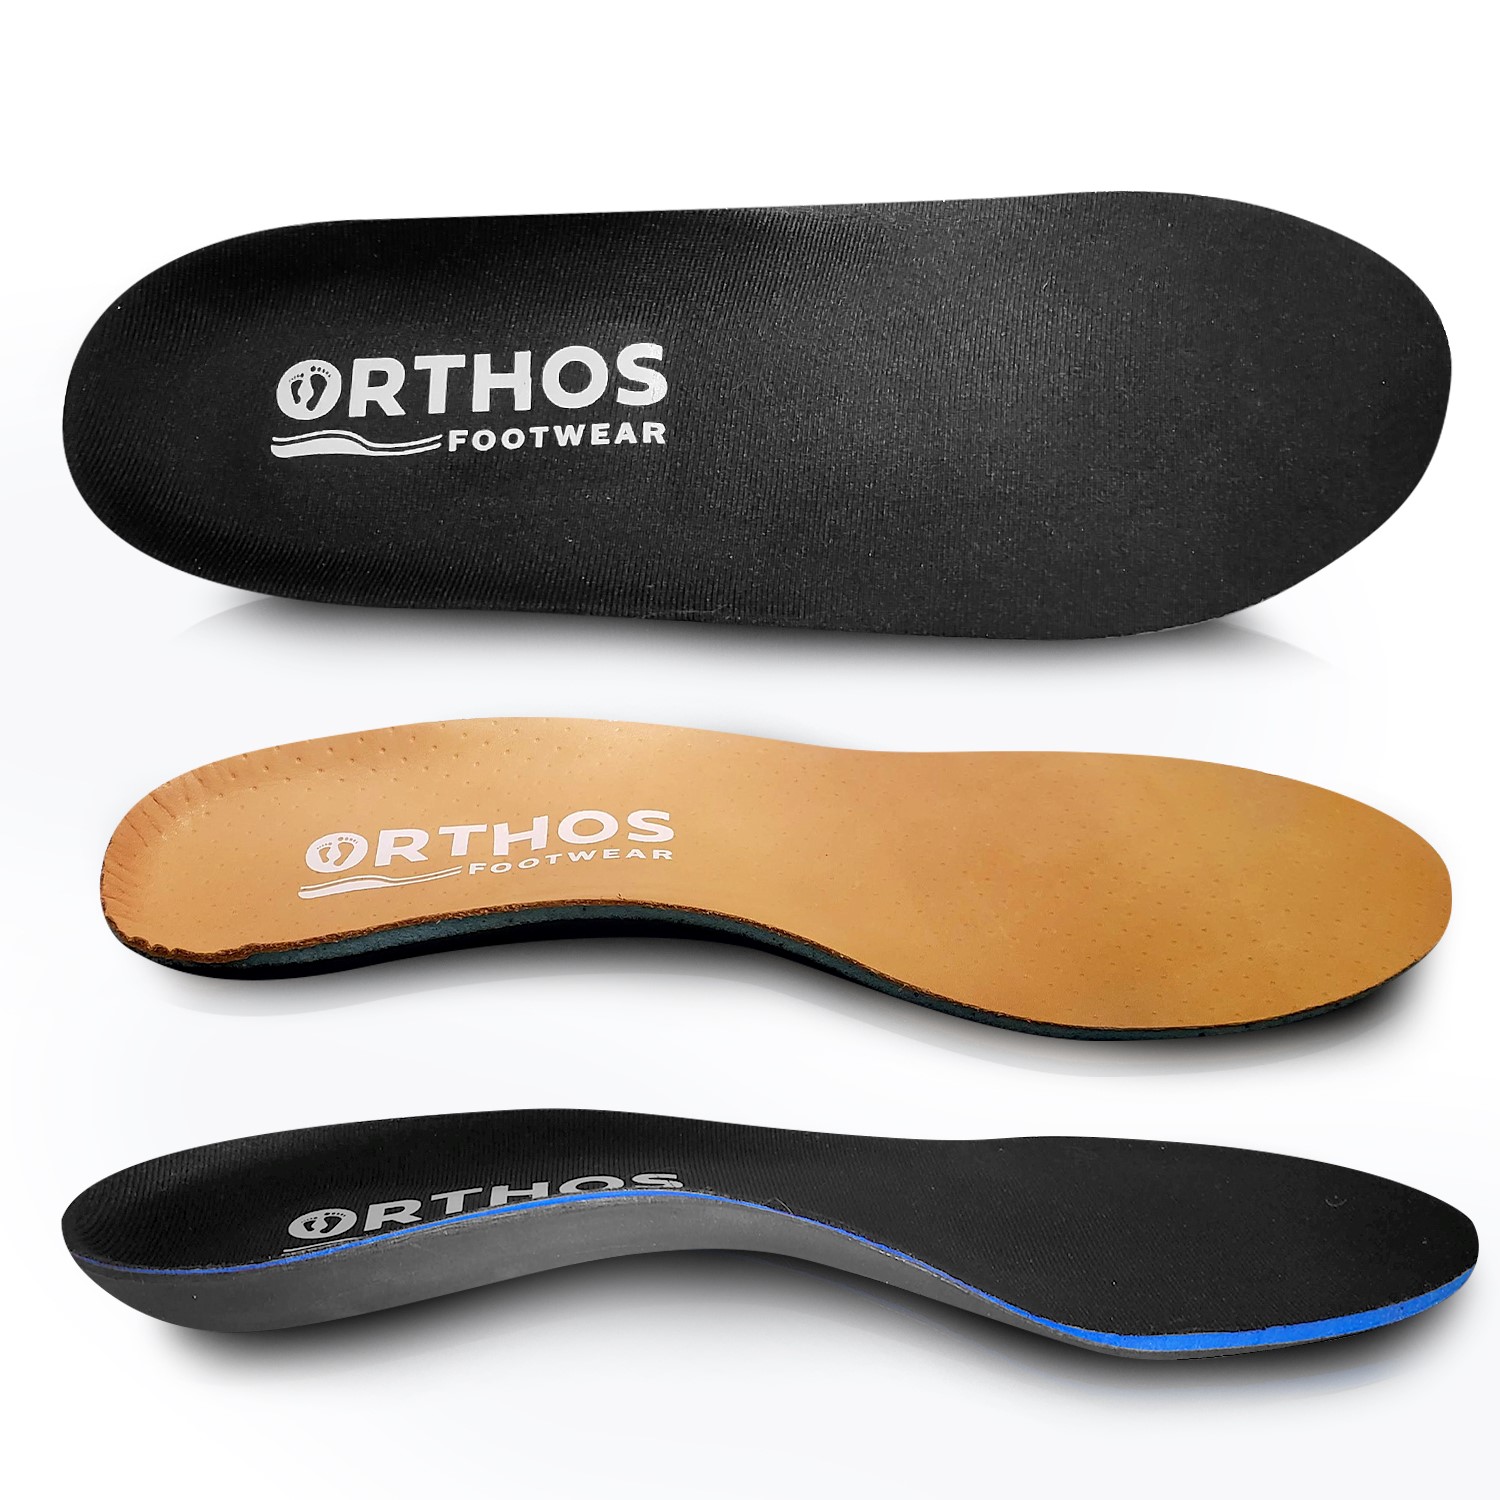 Womens 7 Mens 6 Inserts W/ Arc size Orthos Shearling Orthotic Insoles C 